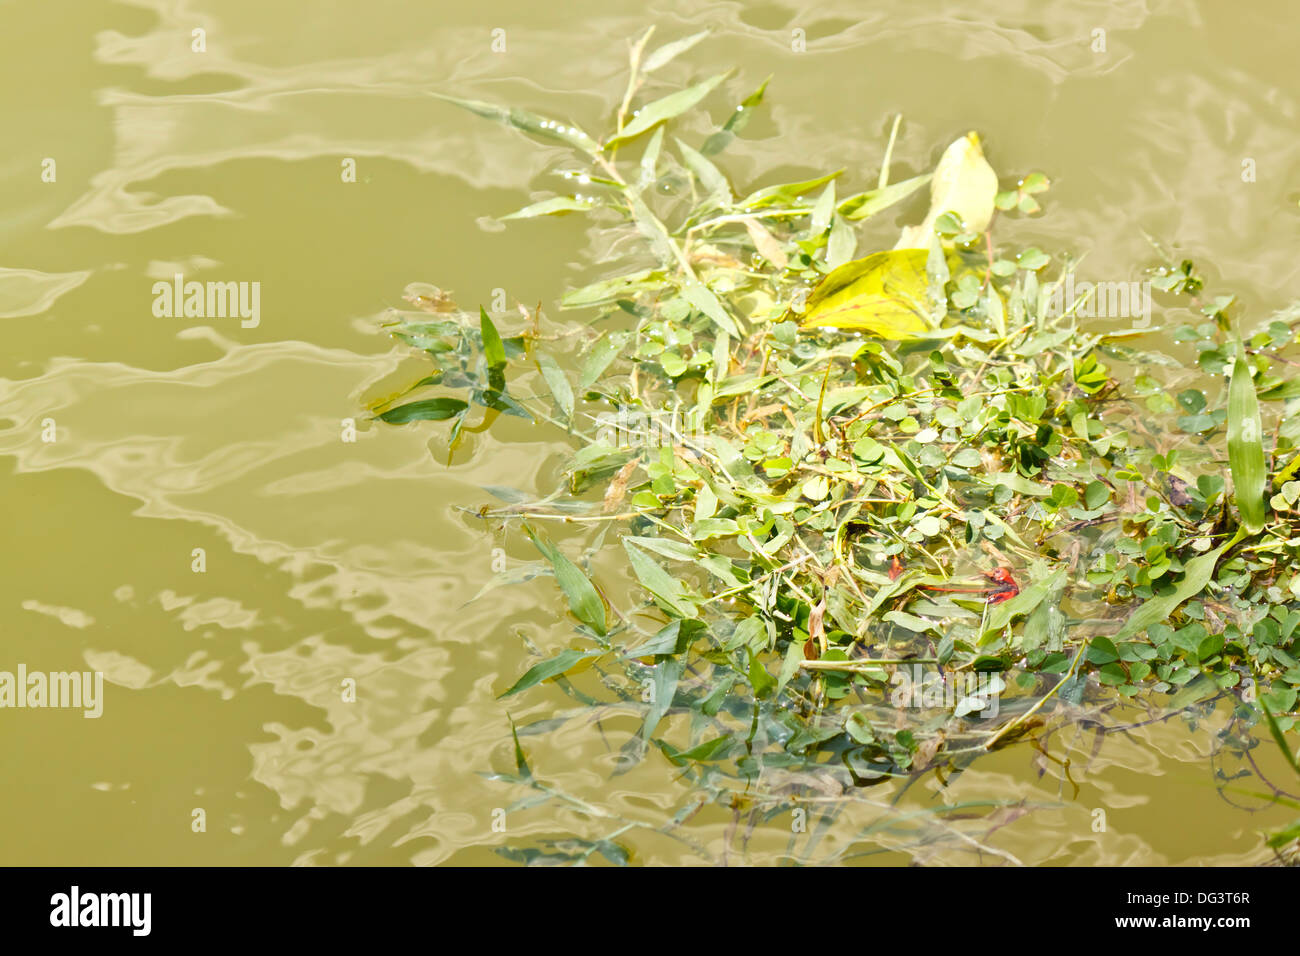 weed in river Stock Photo